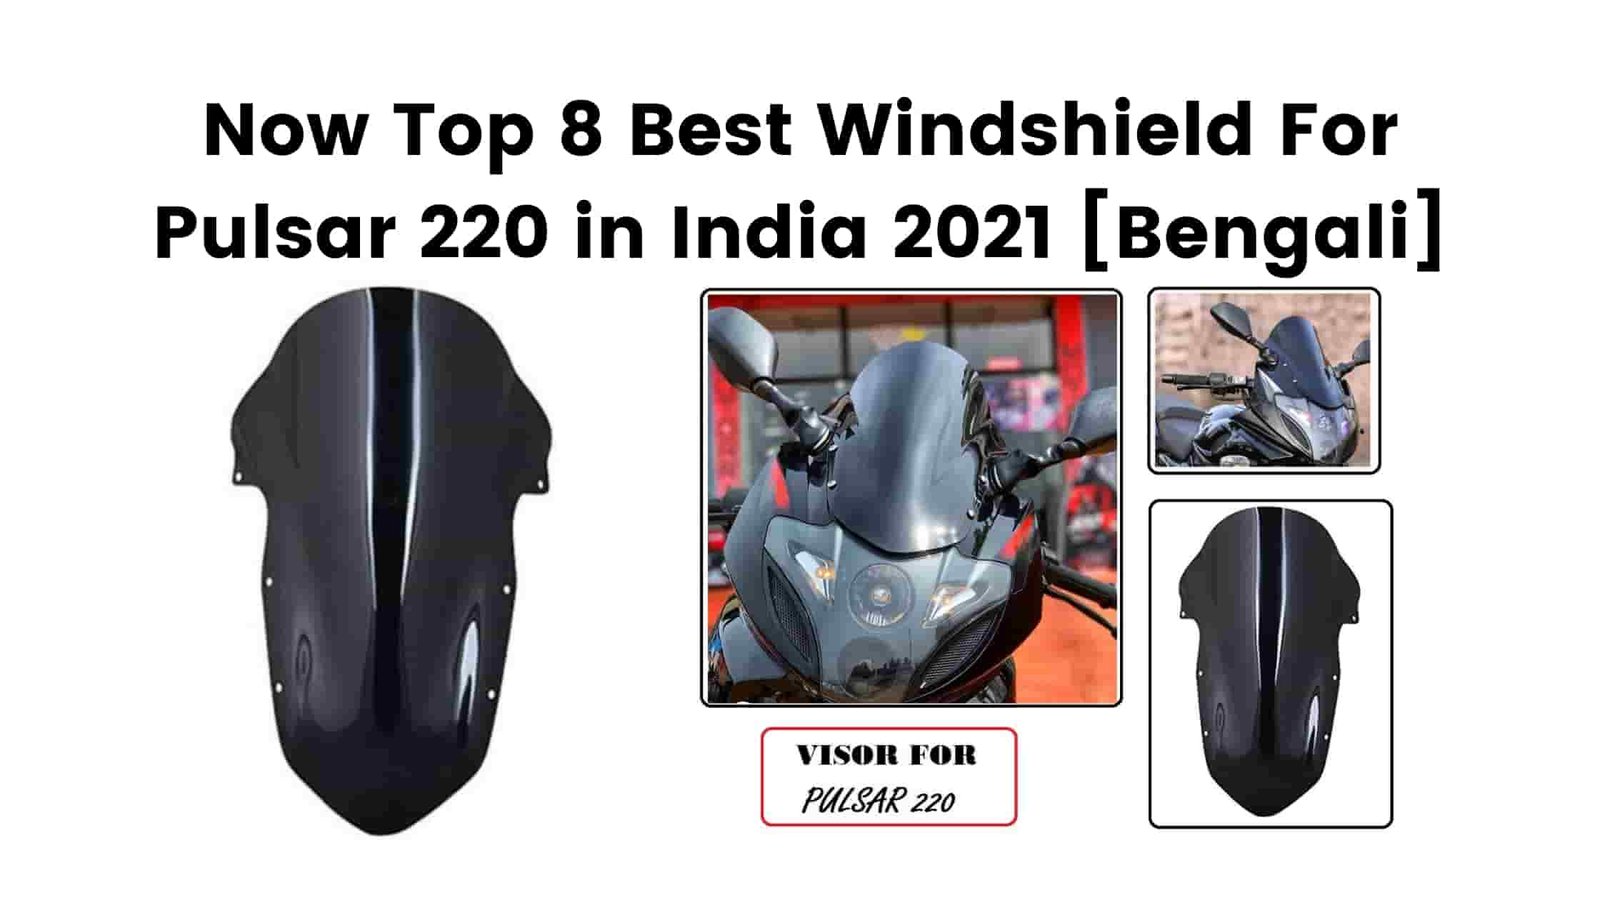 Now Top 8 Best Windshield For Pulsar 220 in India 2021 [Bengali]